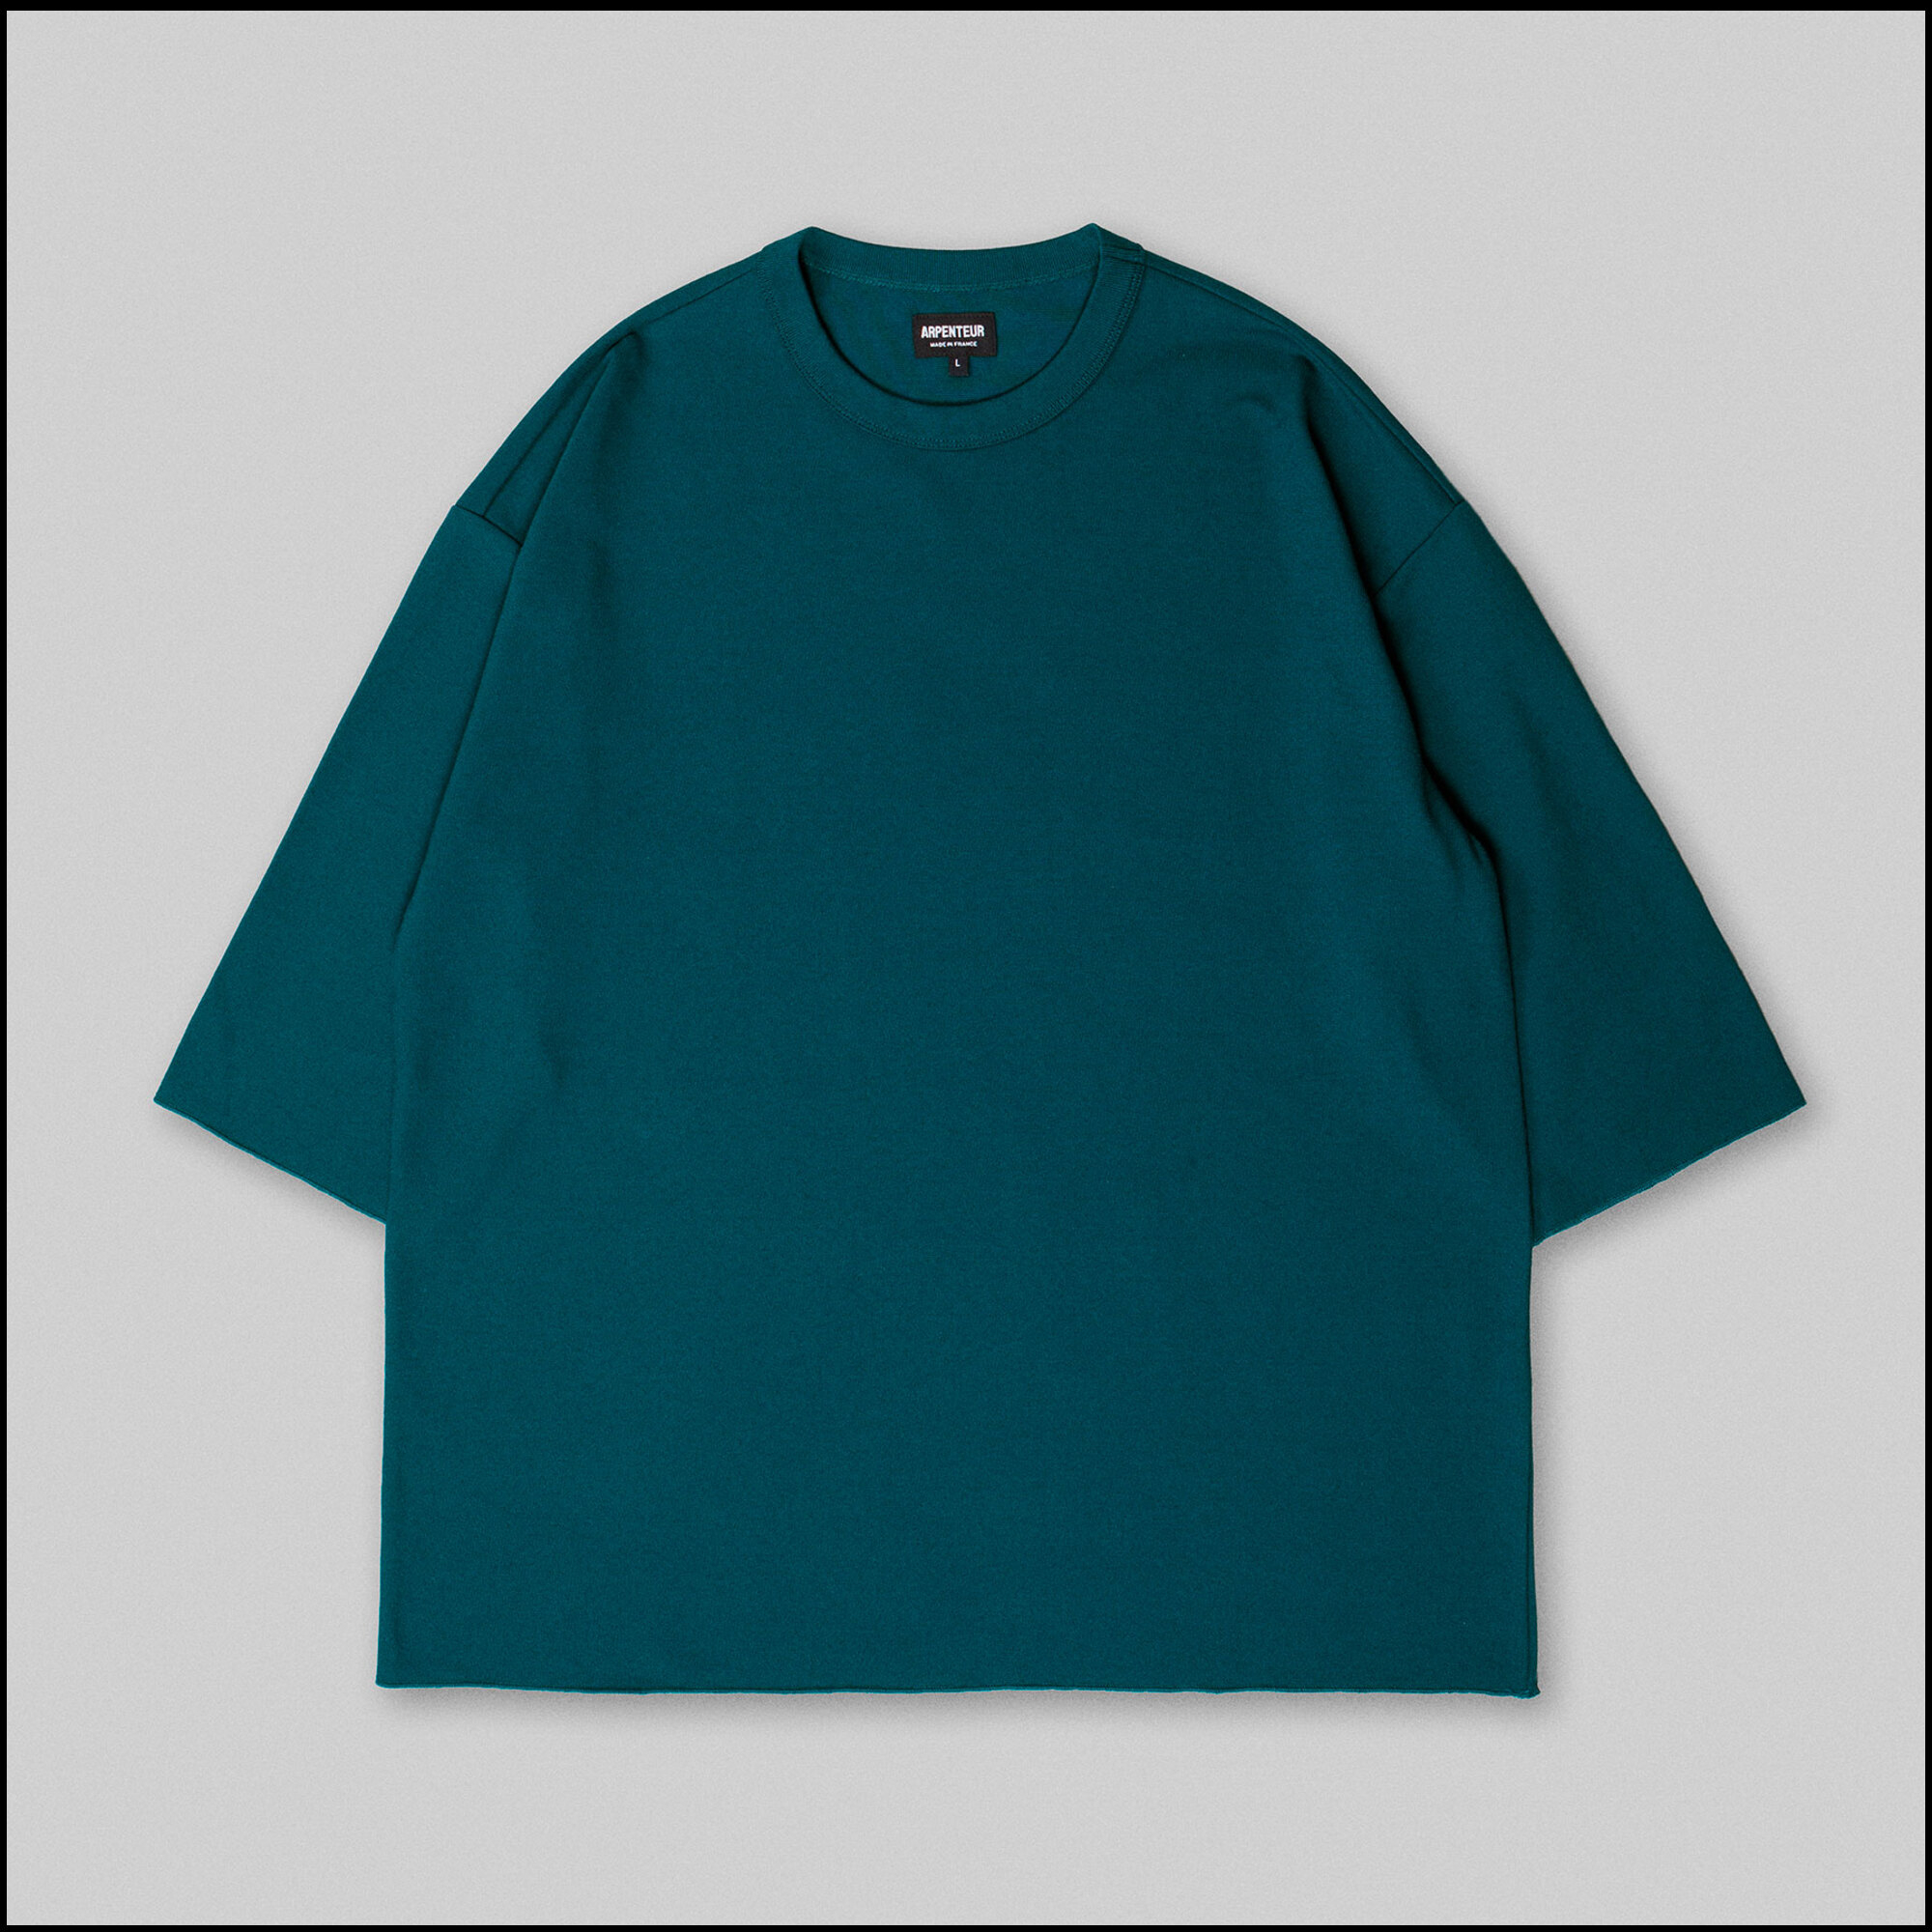 MARINIERE t-shirt by Arpenteur in Peacock blue color